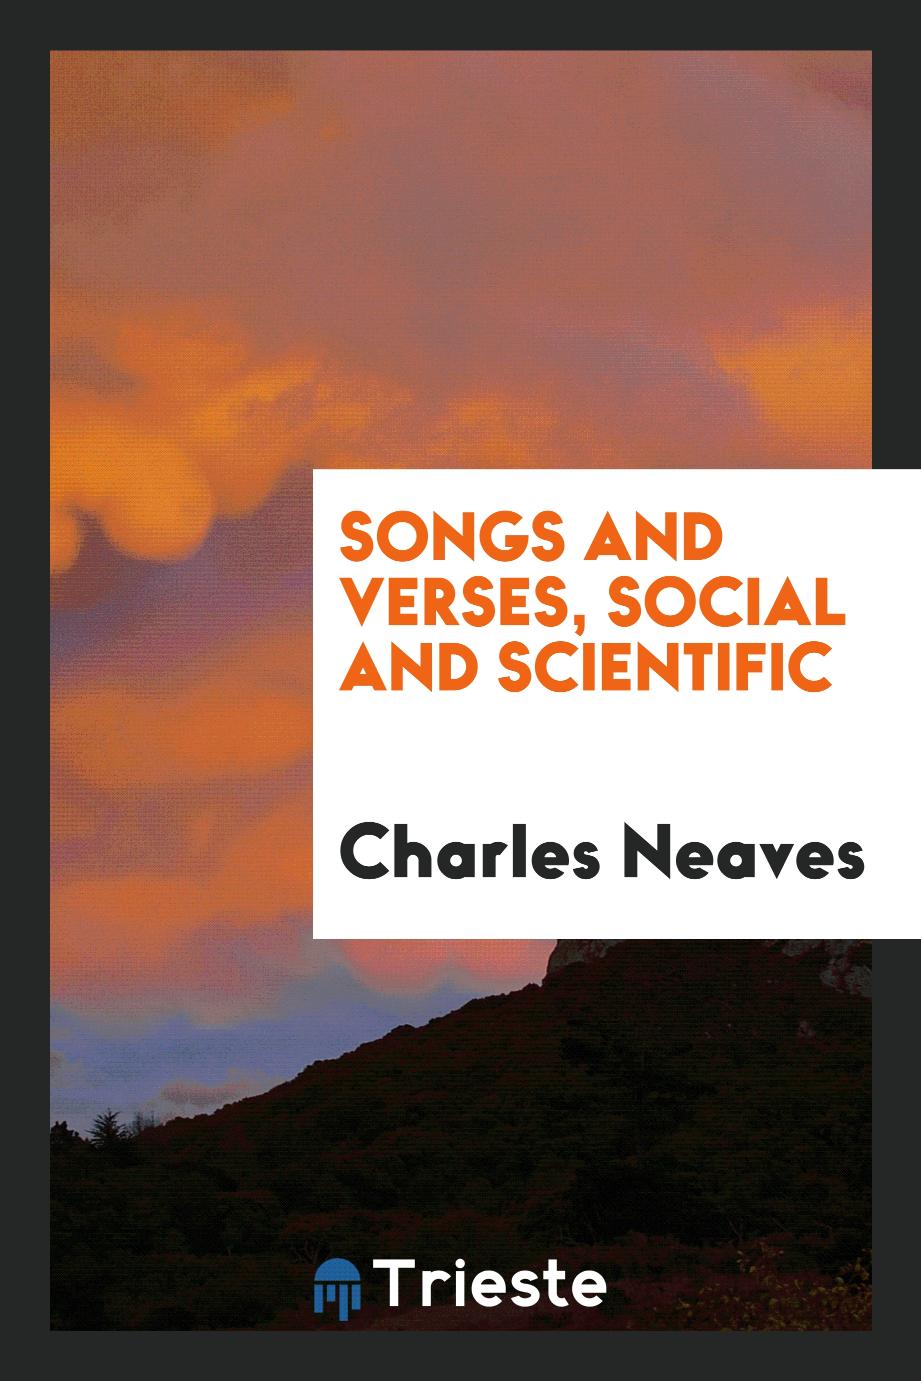 Songs and verses, social and scientific